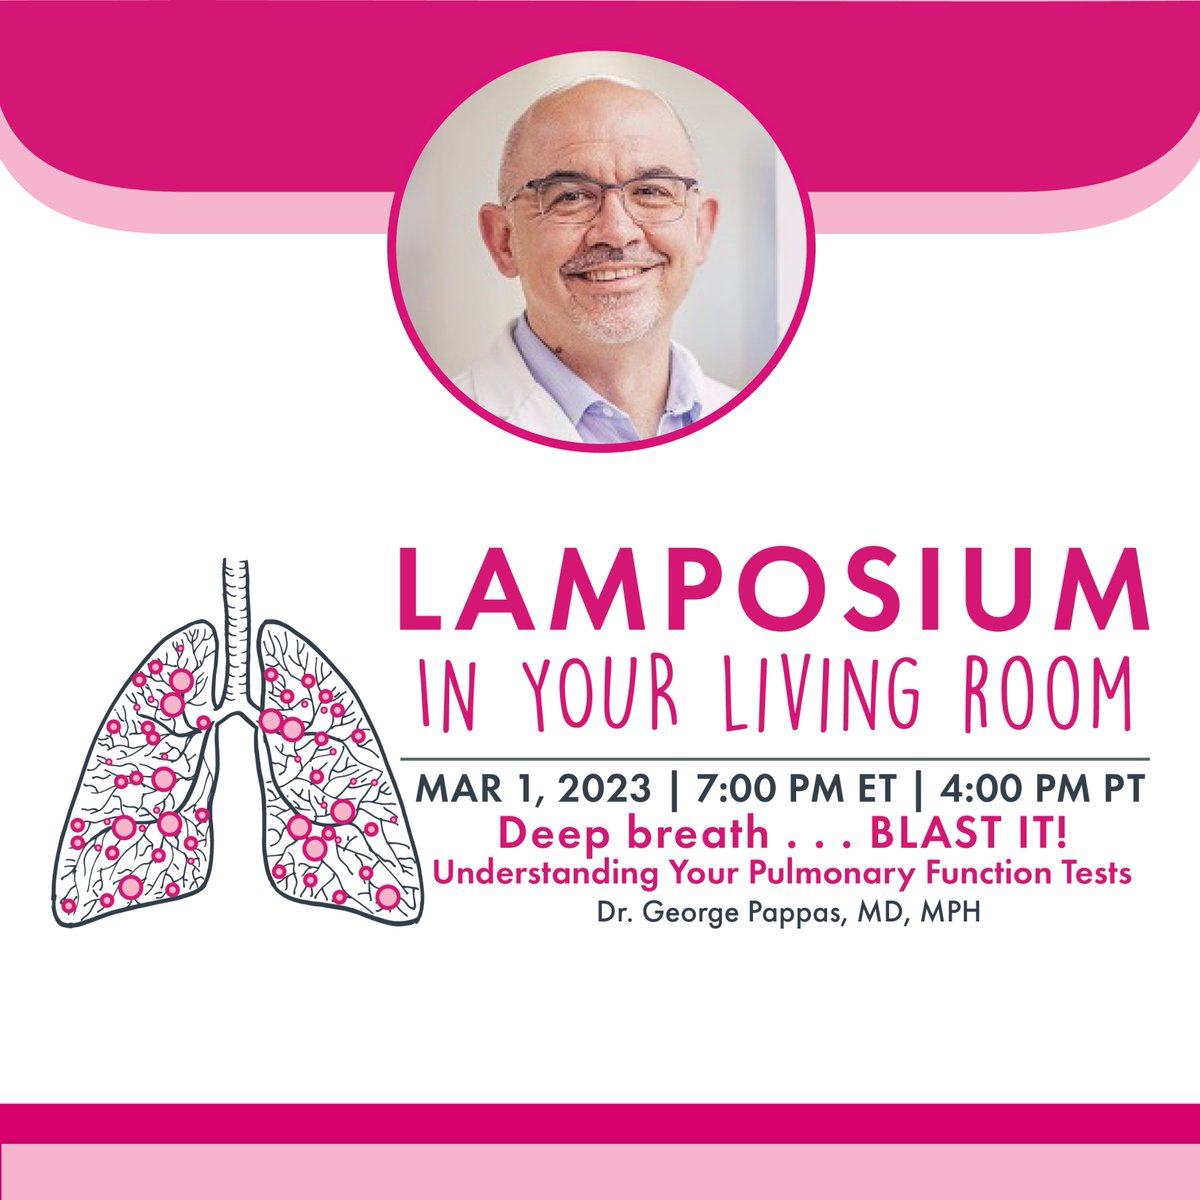 [1/3] Join us TONIGHT at 7:00 PM ET / 4:00 PM PT for LAMposium in Your Living Room!

As a follow-up to his standout presentation at the 2022 International LAM Research Conference & LAMposium, Dr. George Pappas will discuss the ins and outs of pulmonary function tests (PFTs)